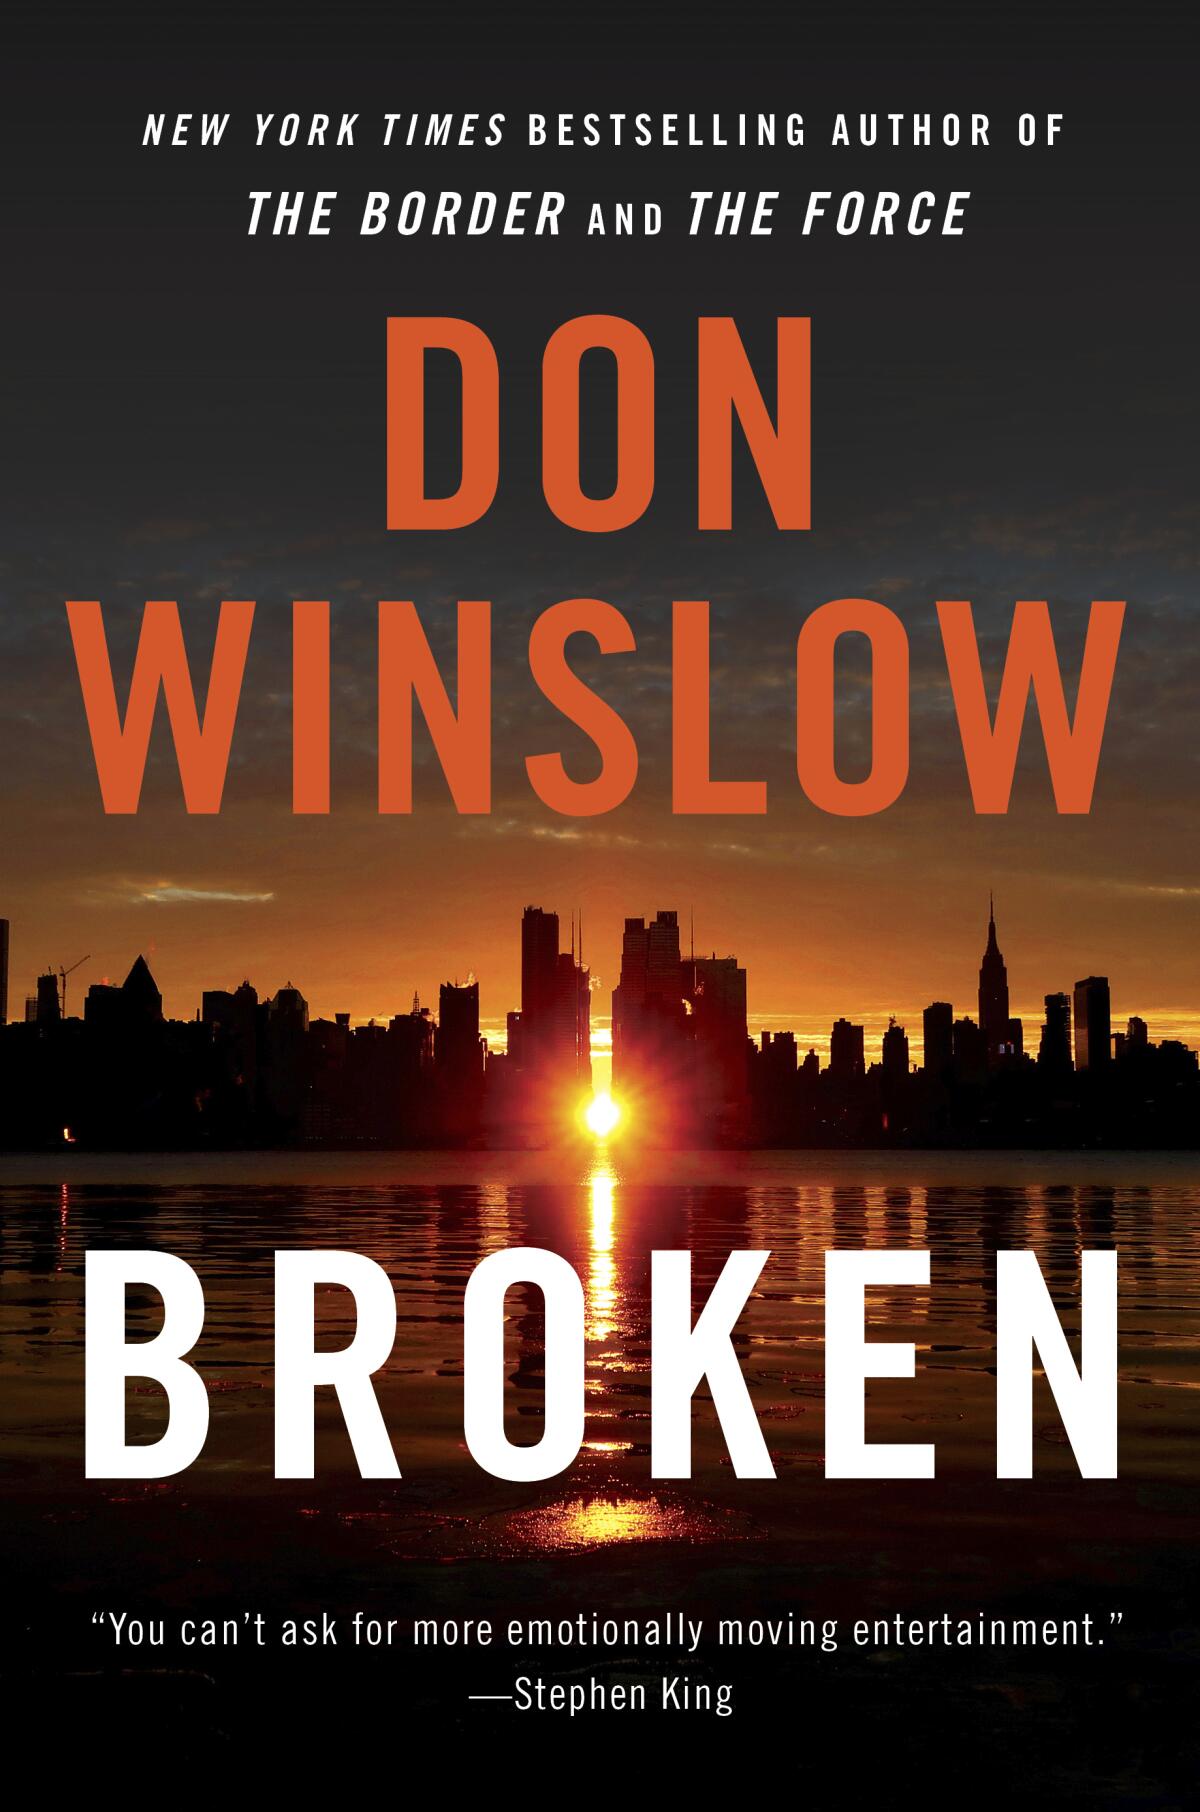 This cover image released by William Morrow shows "Broken" by Don Winslow. (William Morrow via AP)